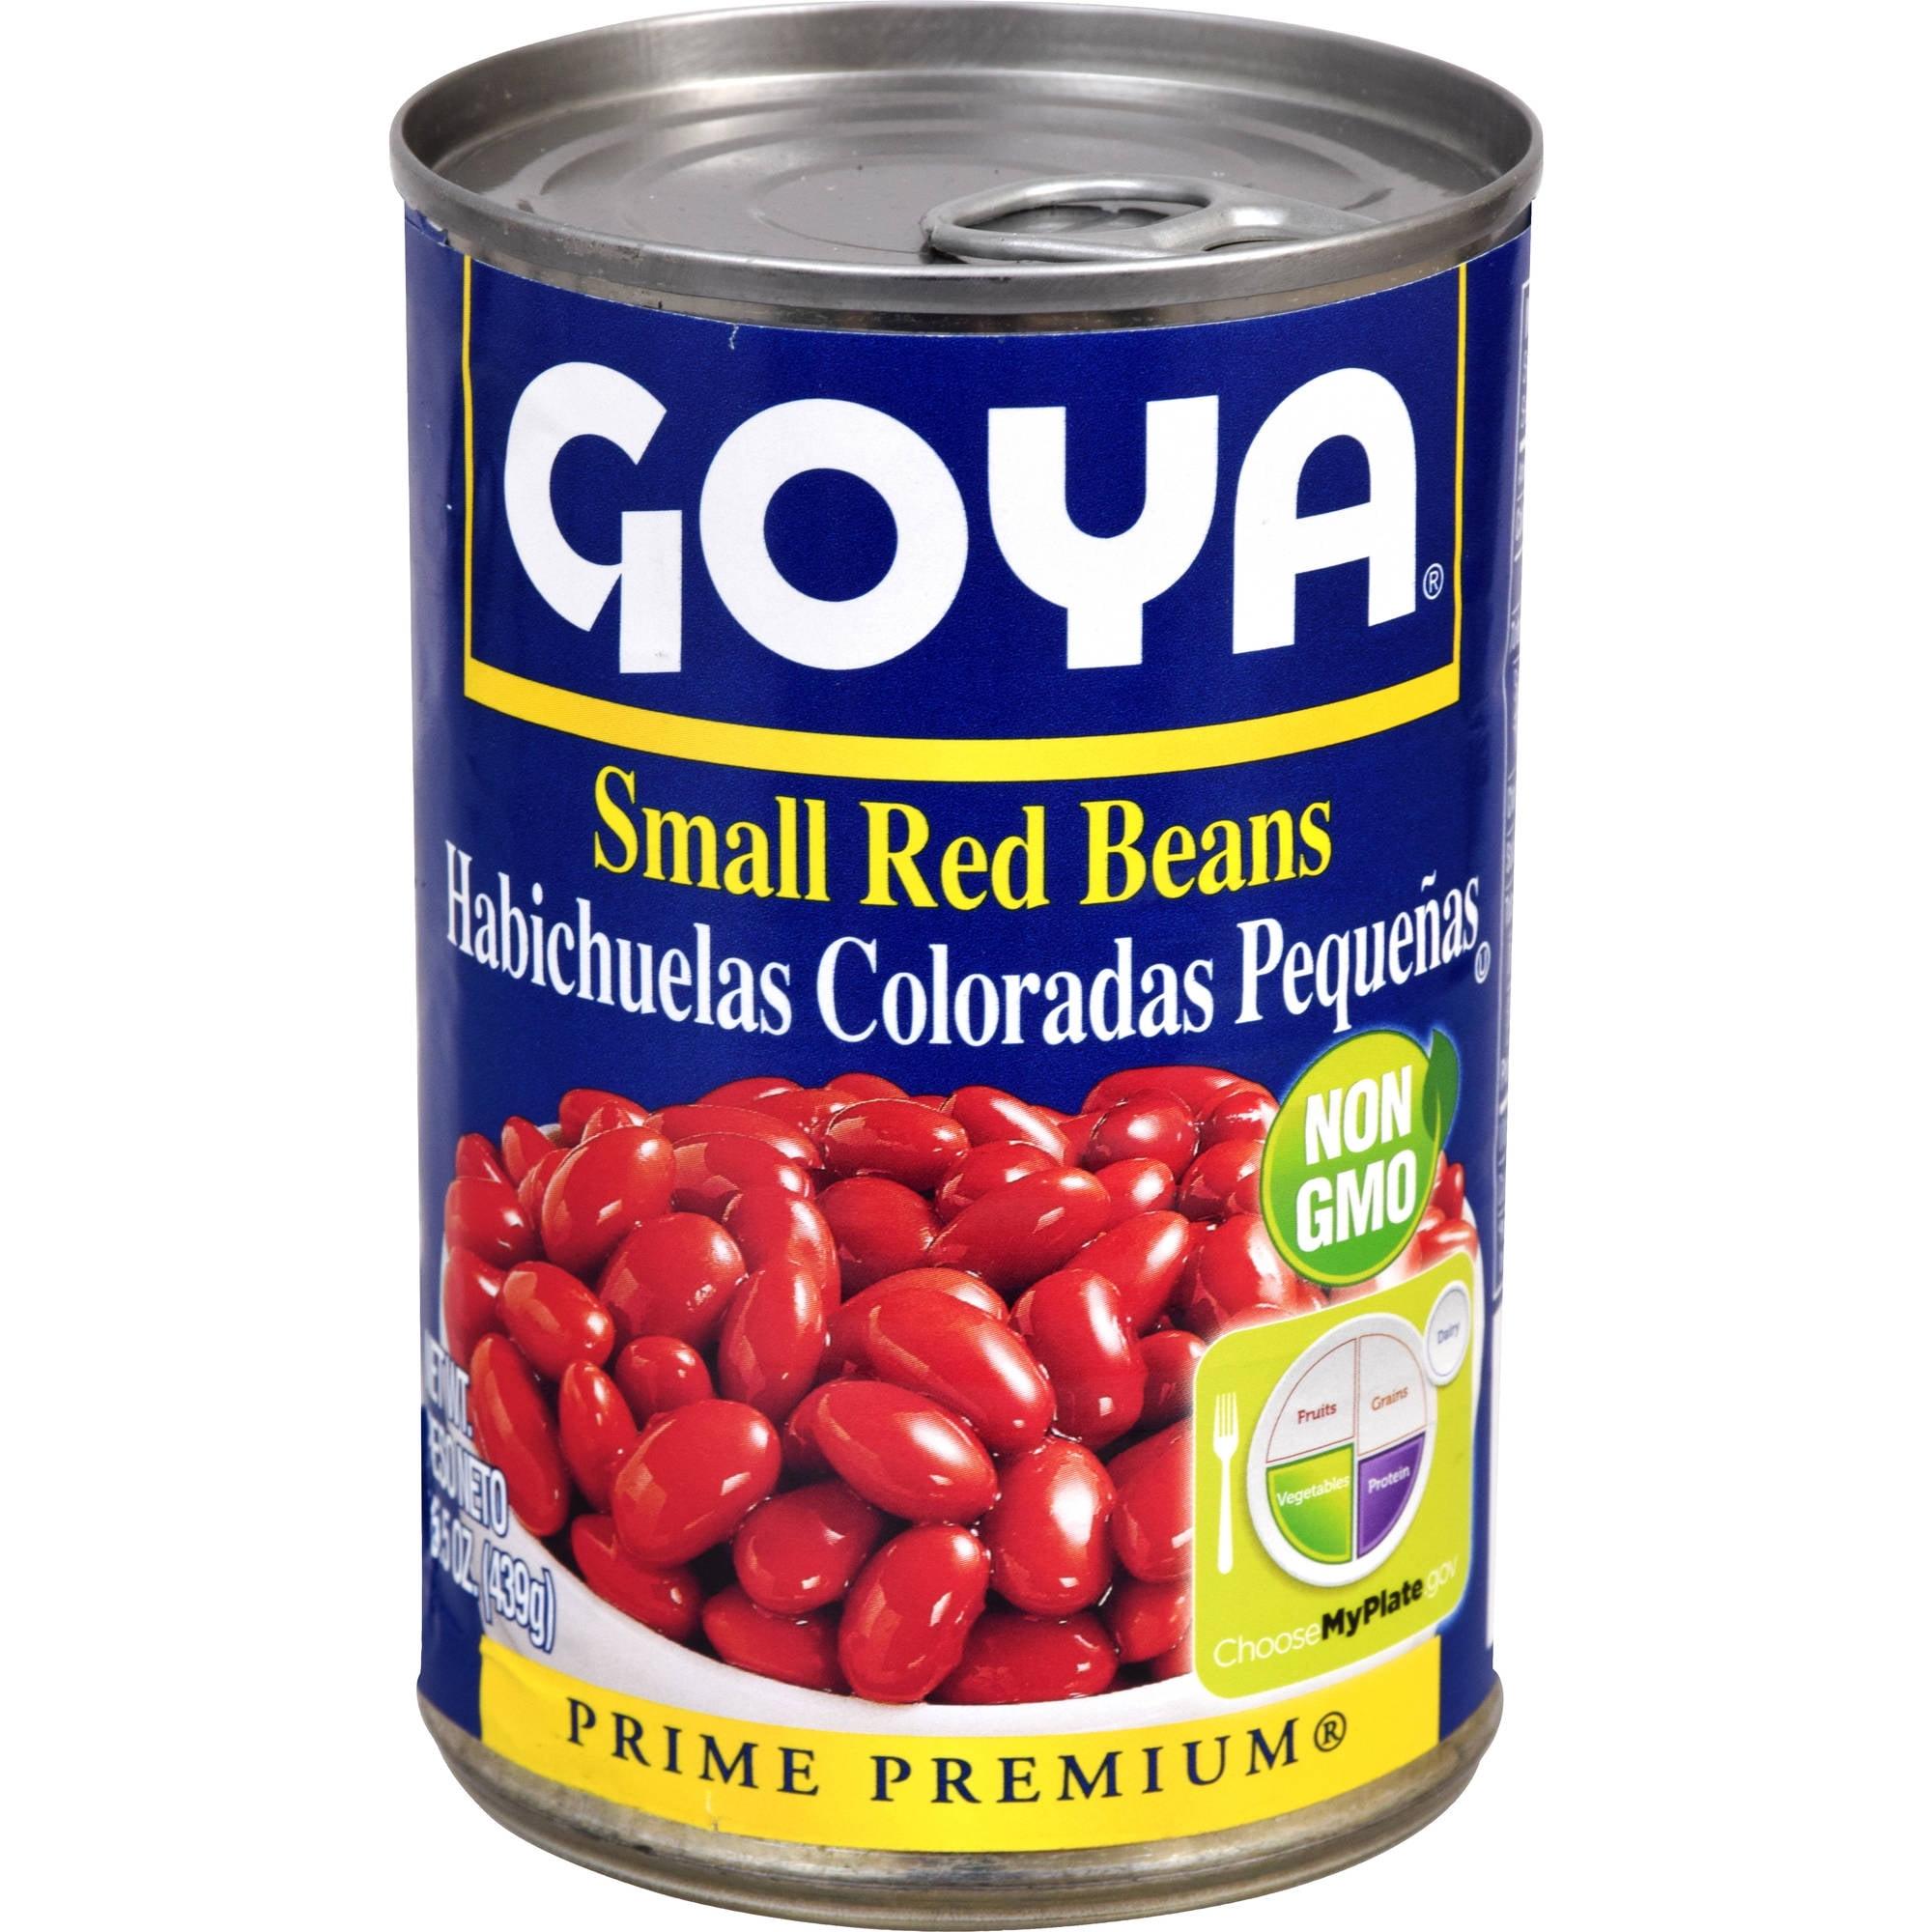 GOYA Small Red Beans 15.5 Oz